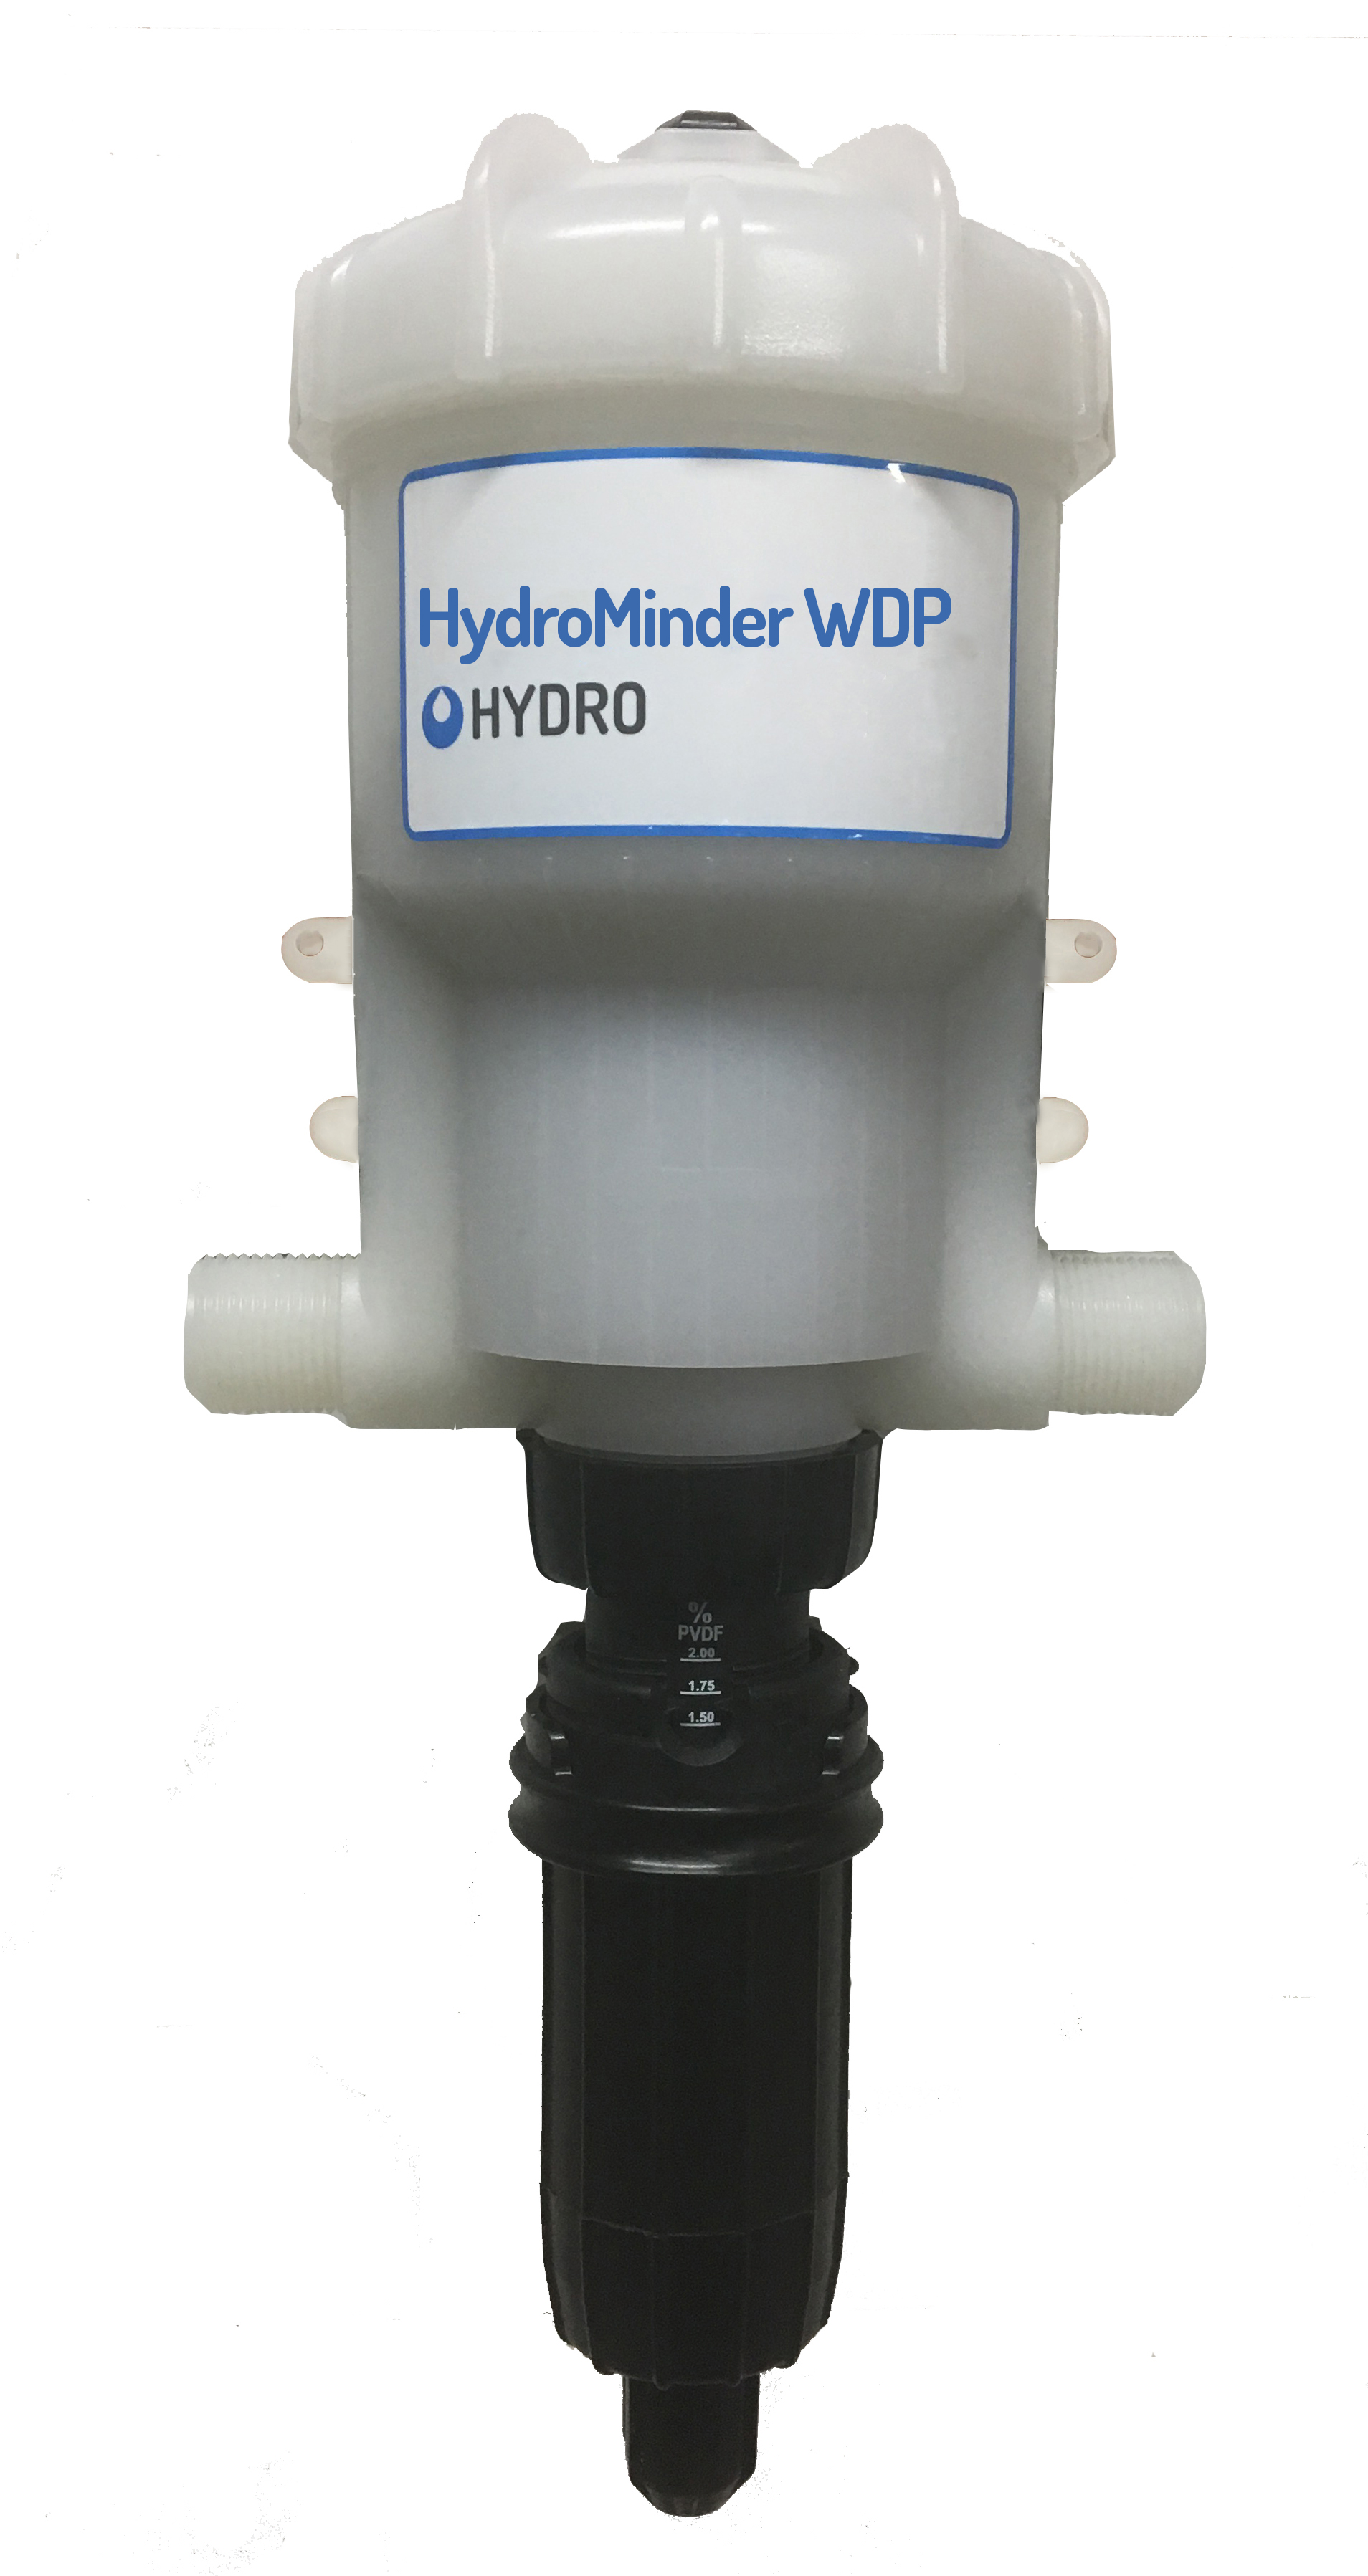 The HydroMinder WDP can be used for all car and large vehicle wash applications.